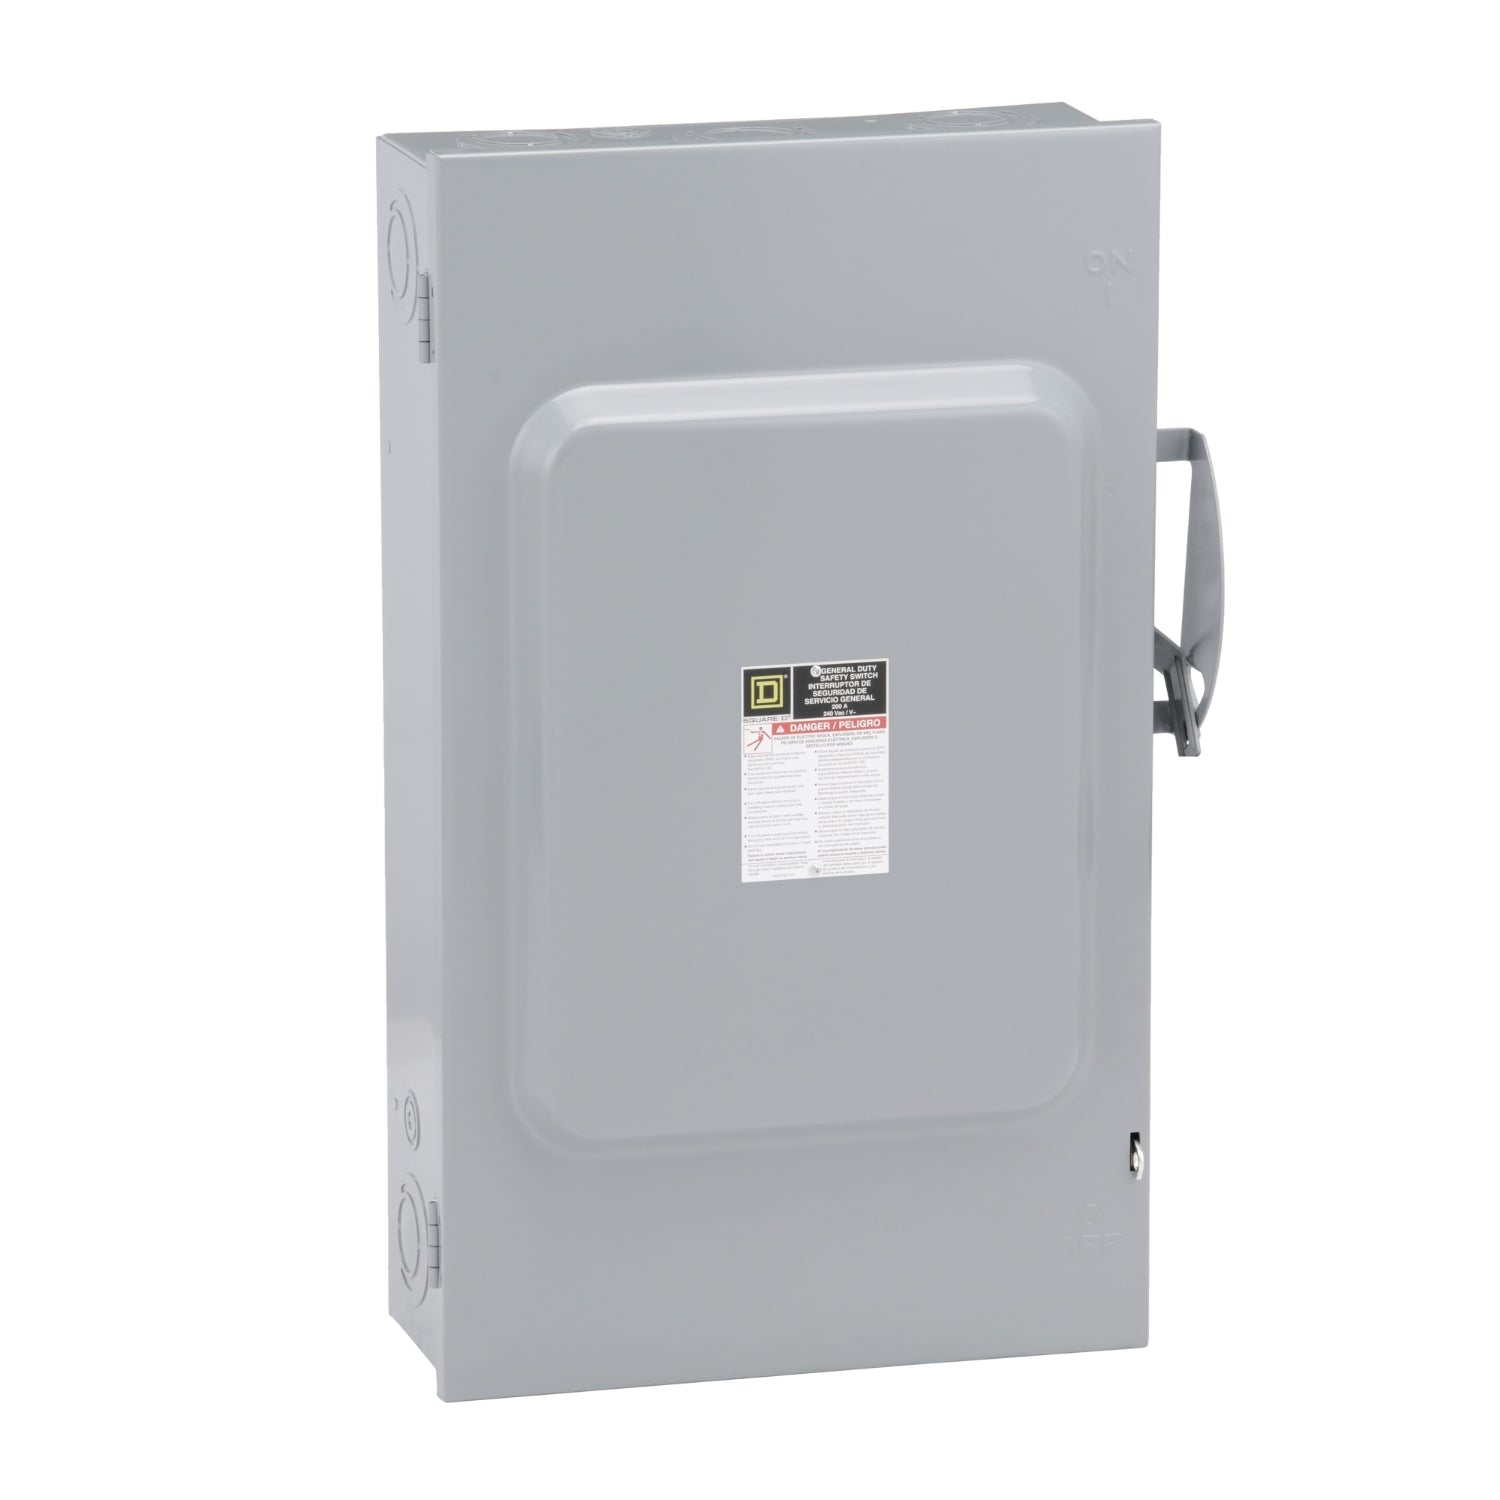 200A Safety Switch - D224N